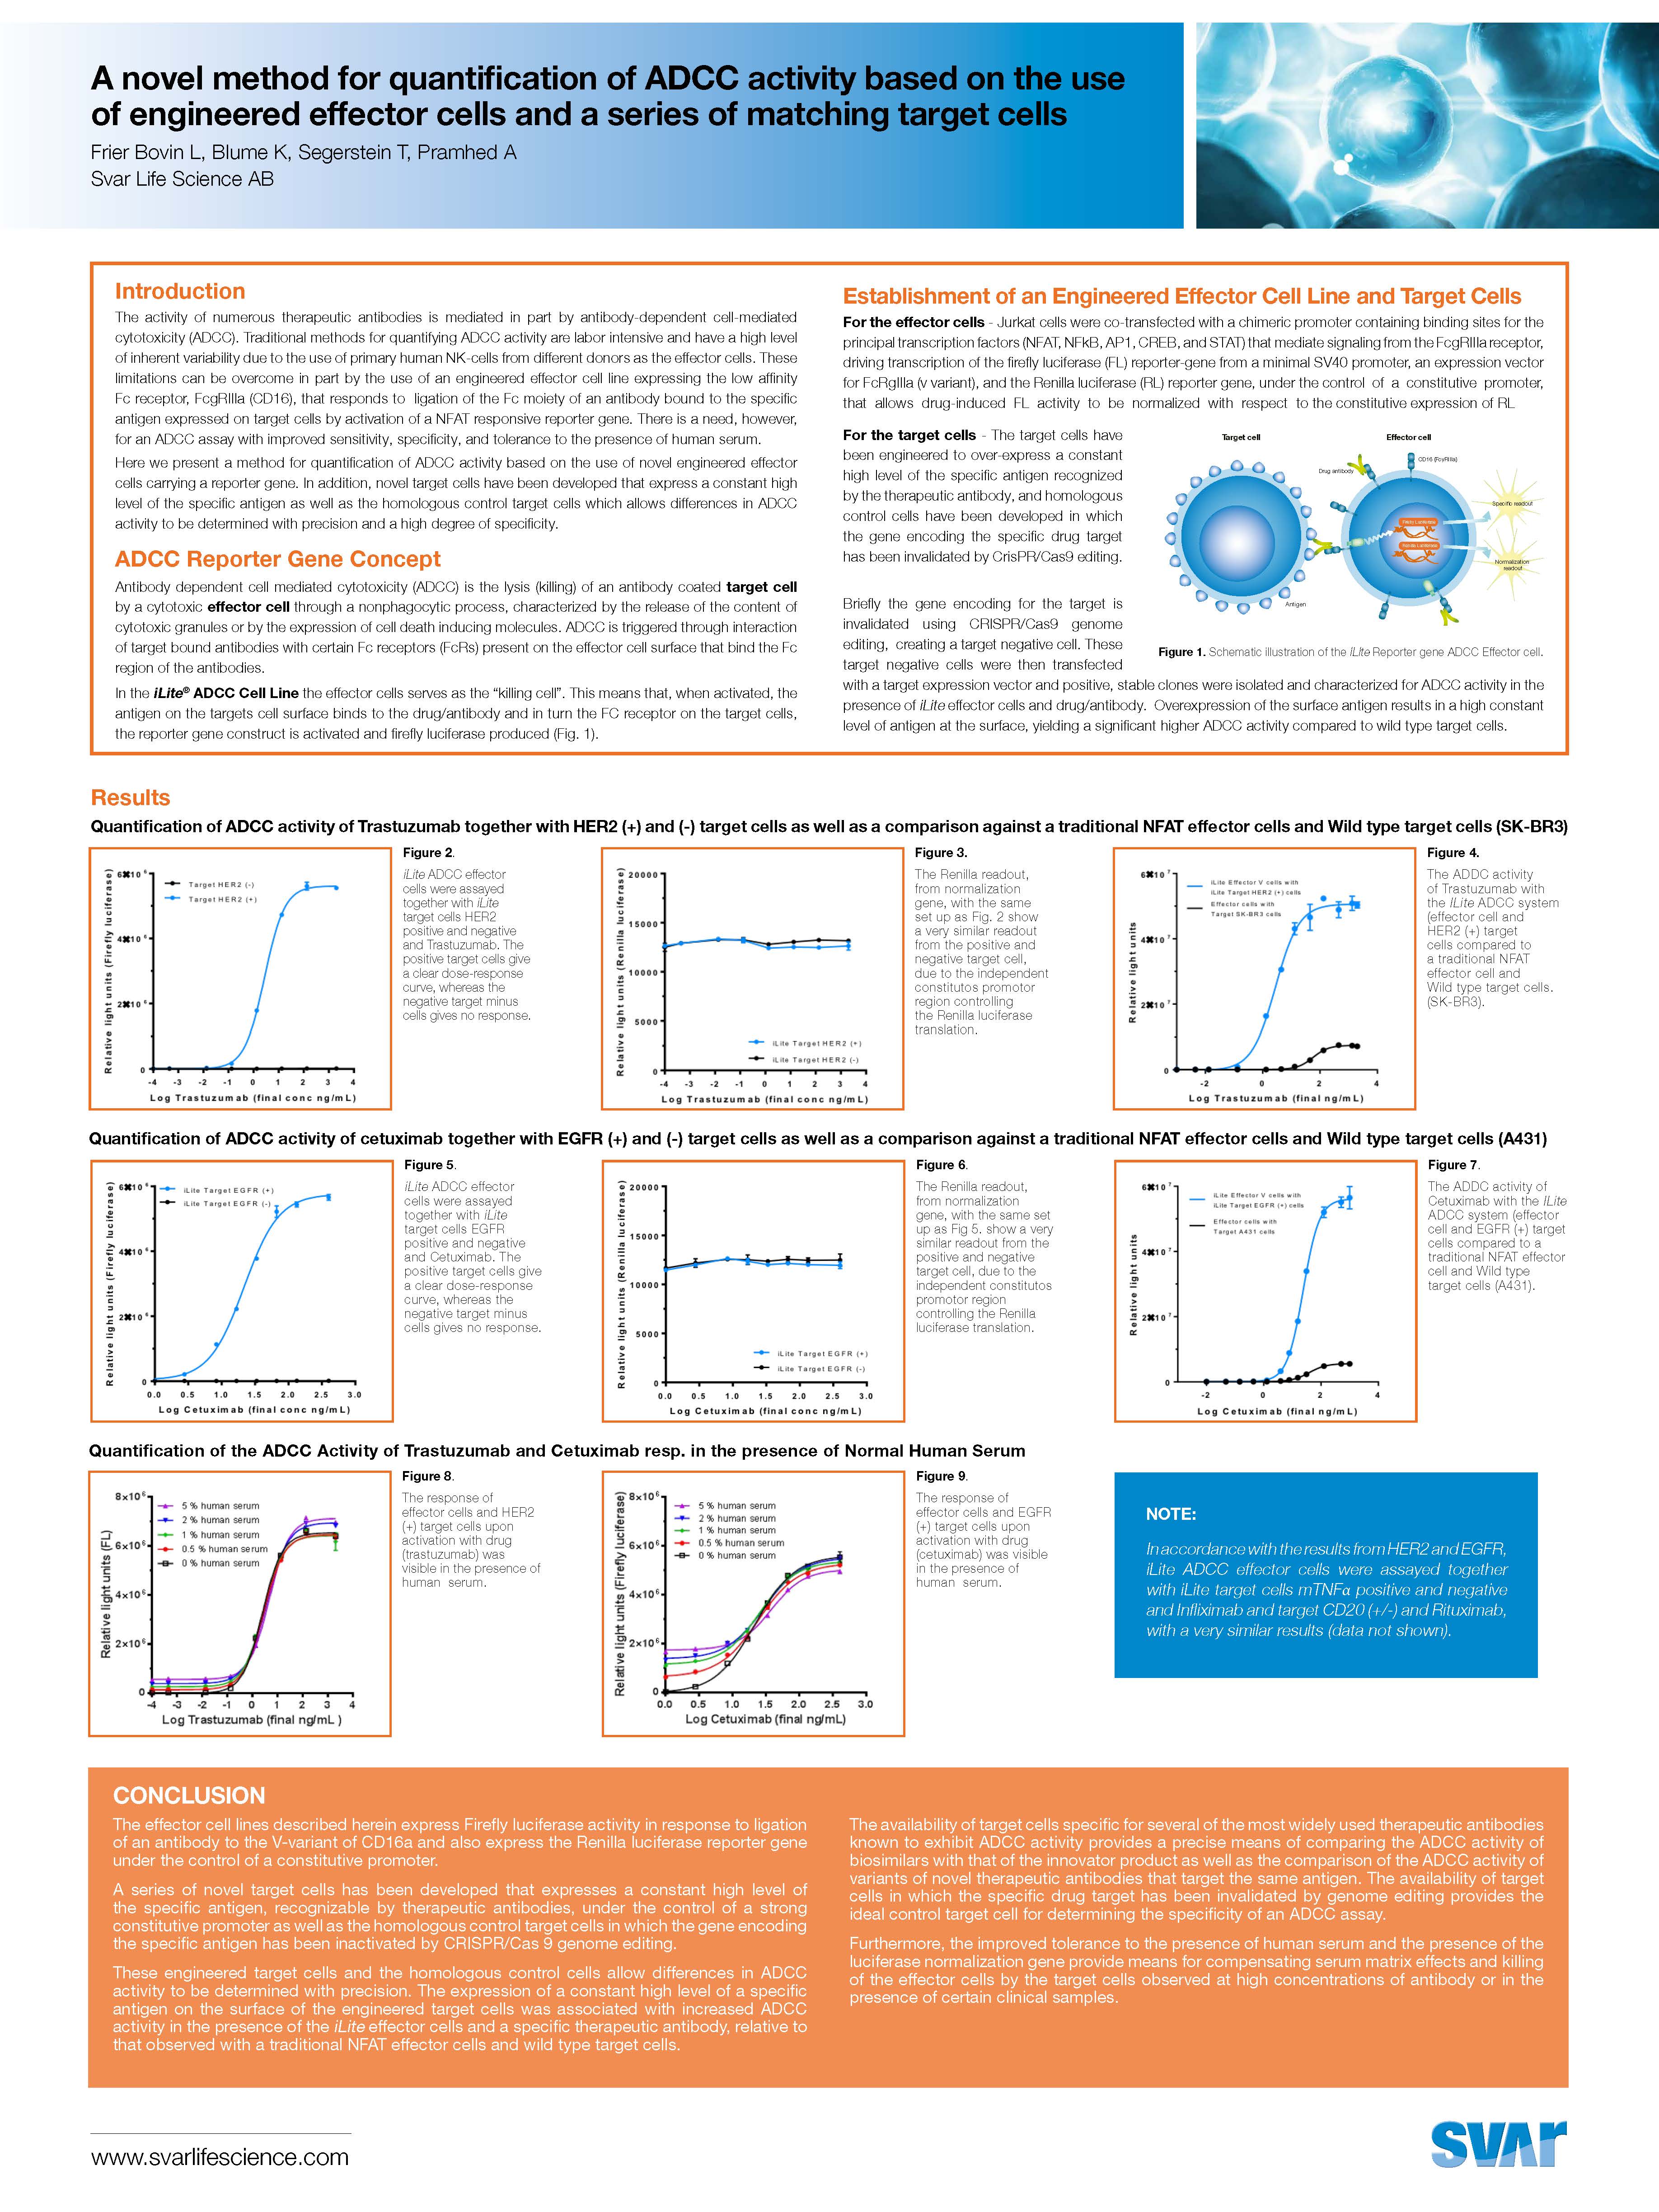 Scientific Poster: A novel method for quantification of ADCC activity based on the use of engineered effector cells and a series of matching target cells